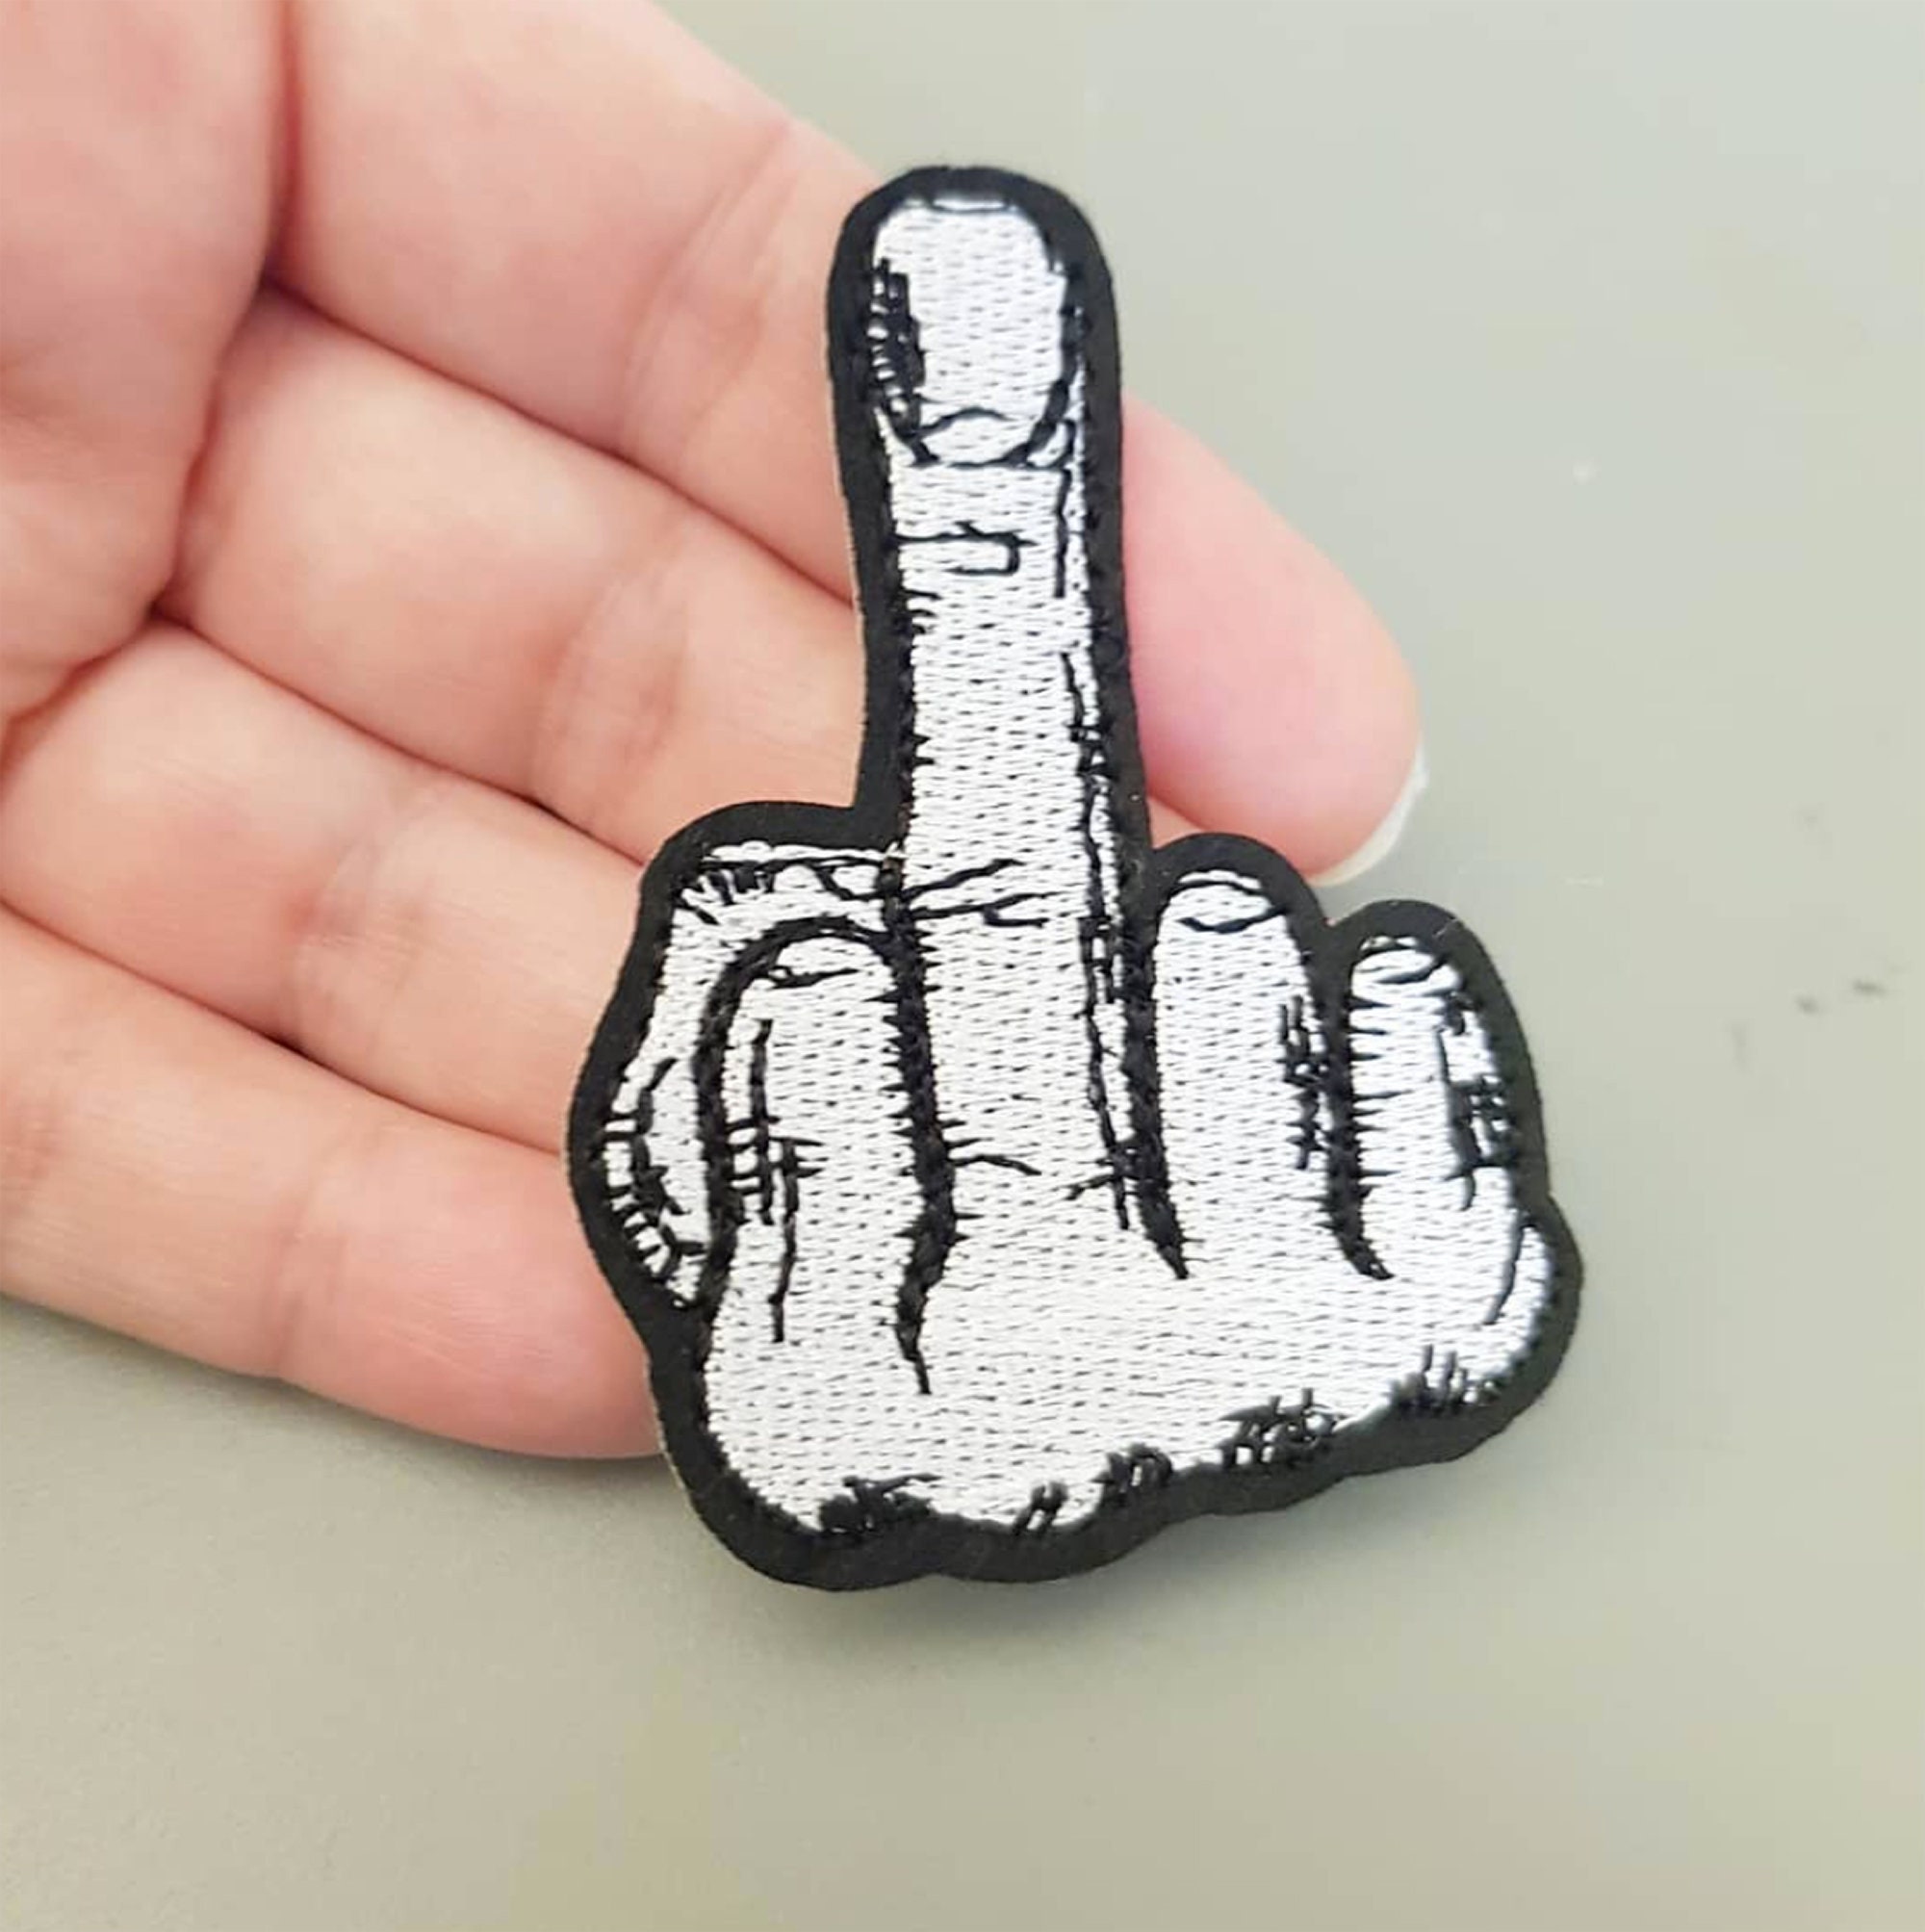 Fck the Haters W/middle Finger Patch Embroidered DIY Iron-on/sew-on  Applique for Jeans Clothing Vest Jacket, Funny Sayings, Humor Sarcastic 